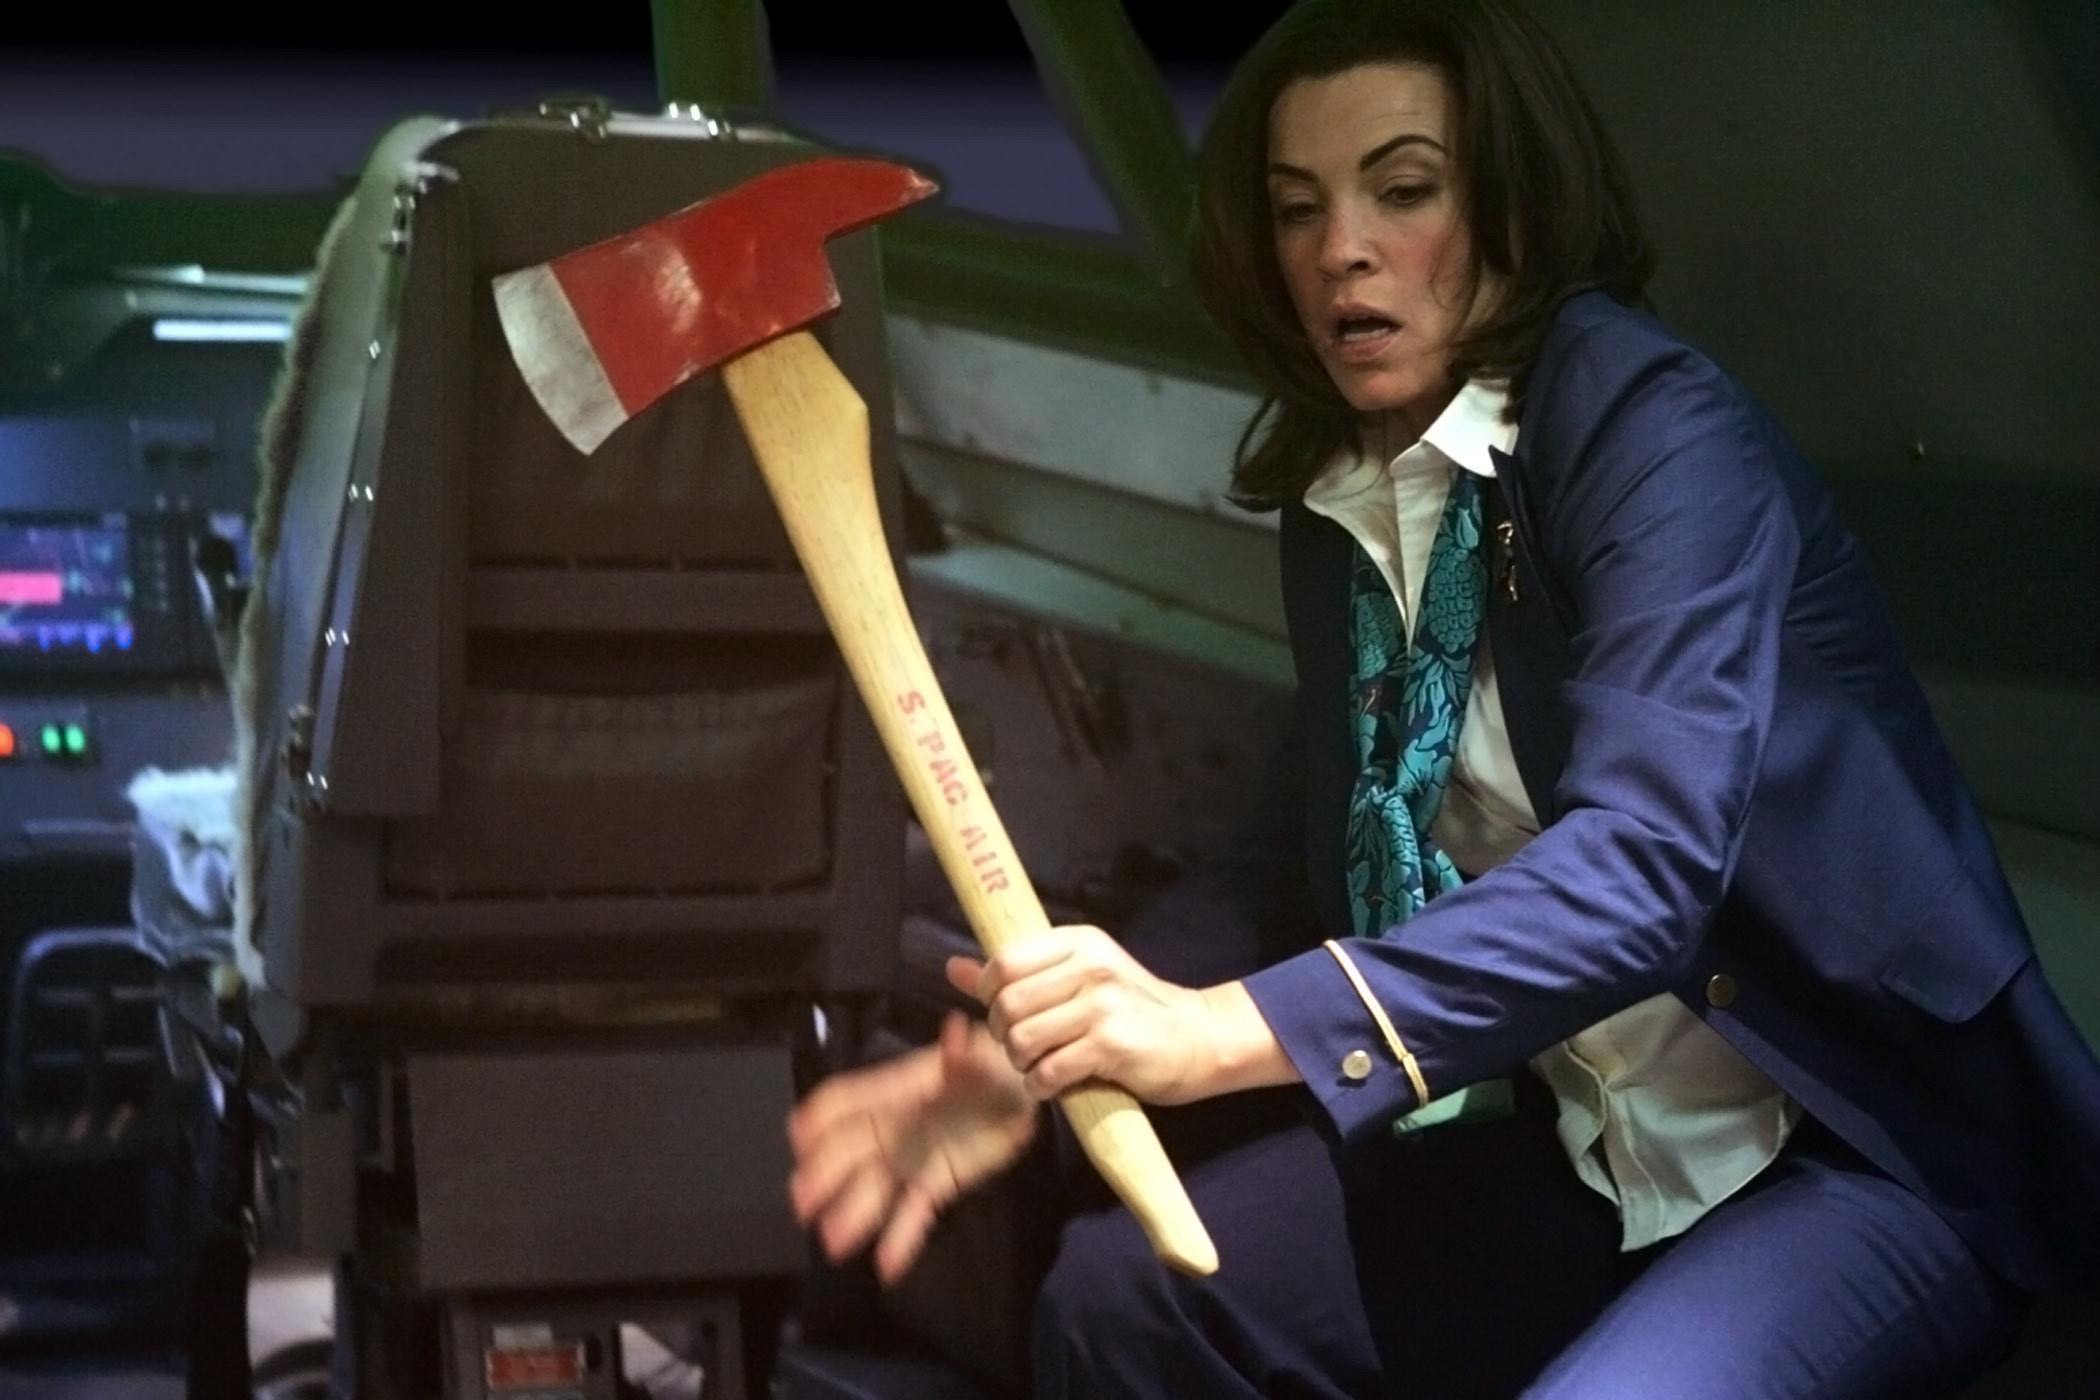 Julianna Margulies holds an ax on a plane while looking terrified and wearing a flight attendant uniform